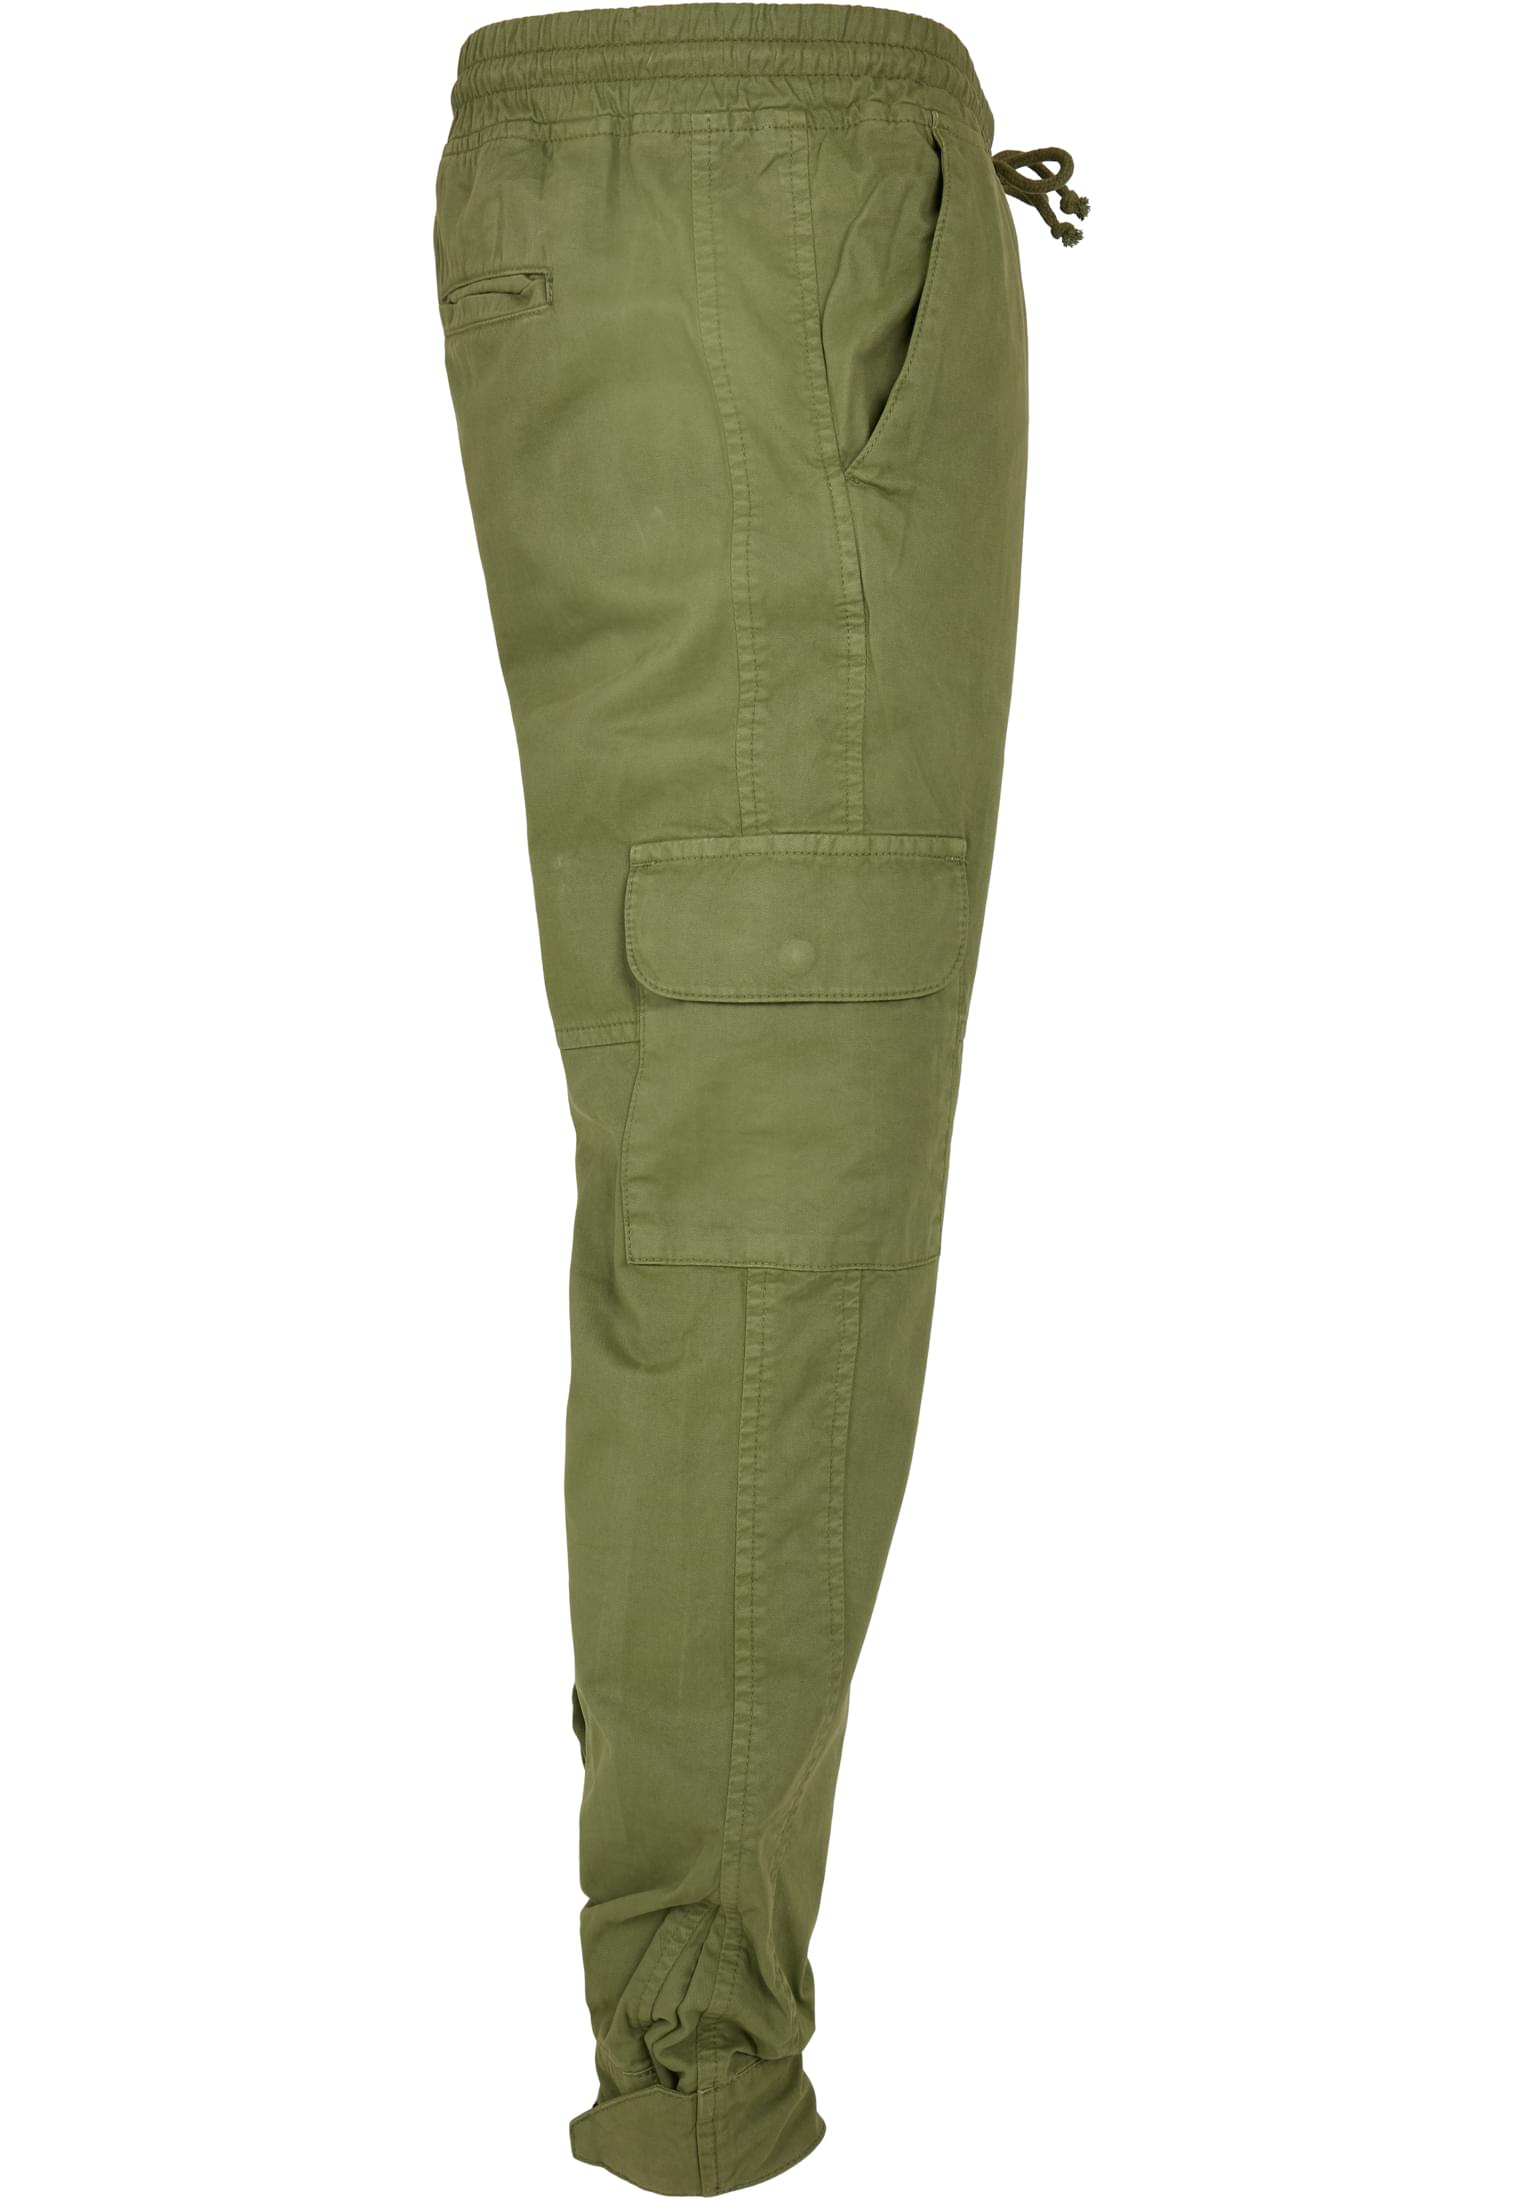 Sweatpants Military Jogg Pants in Farbe newolive